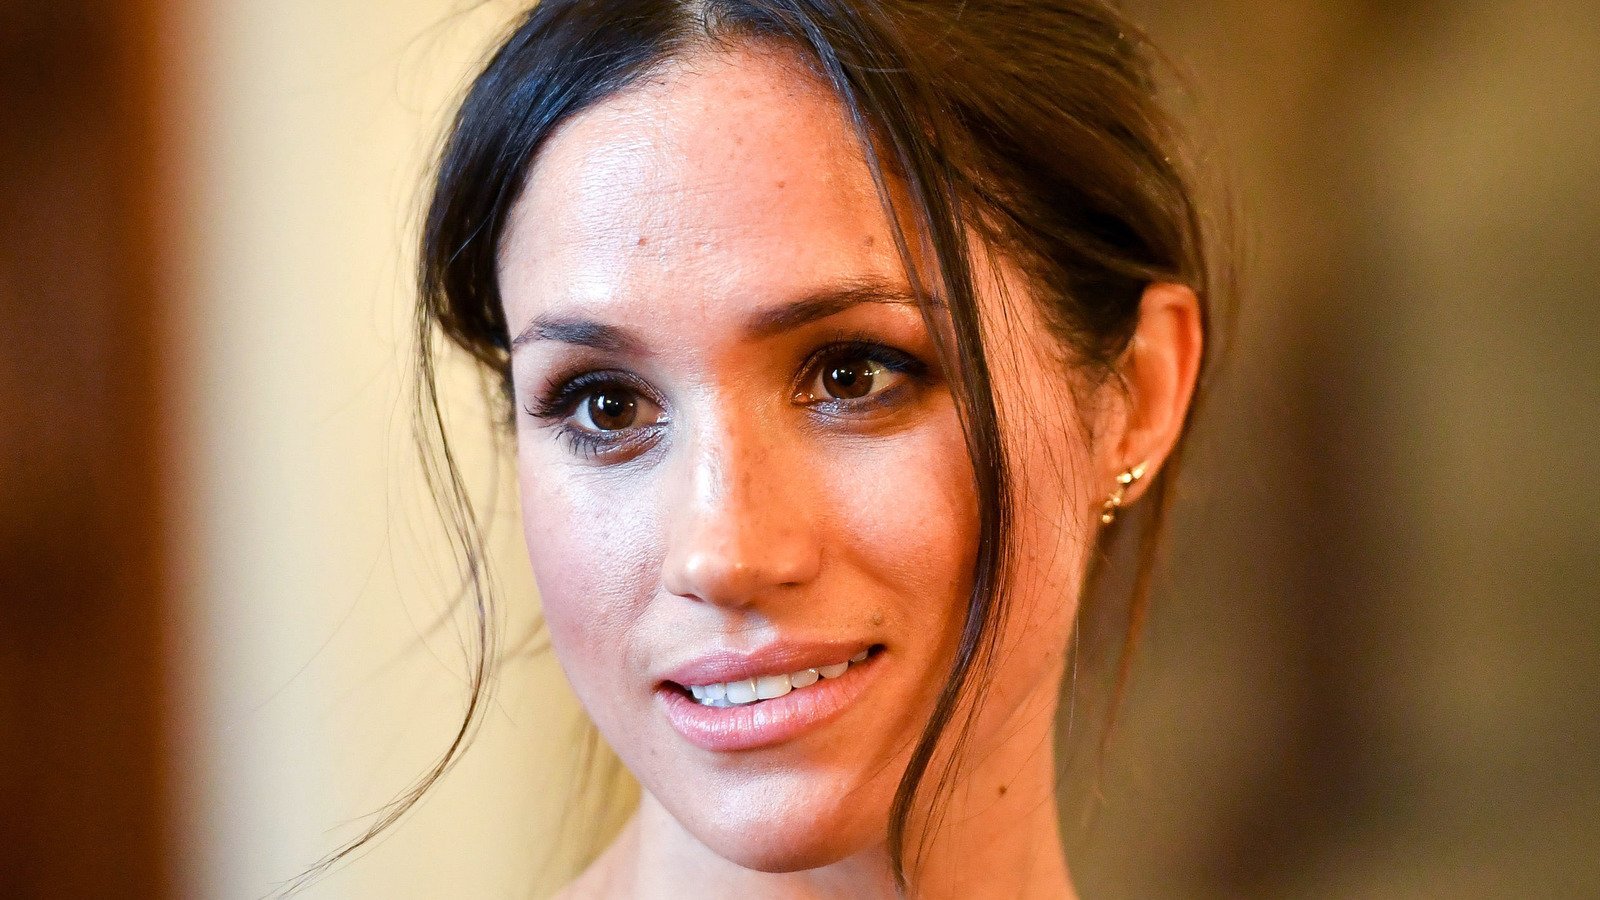 Stories About Meghan Markle That Let Everyone Down